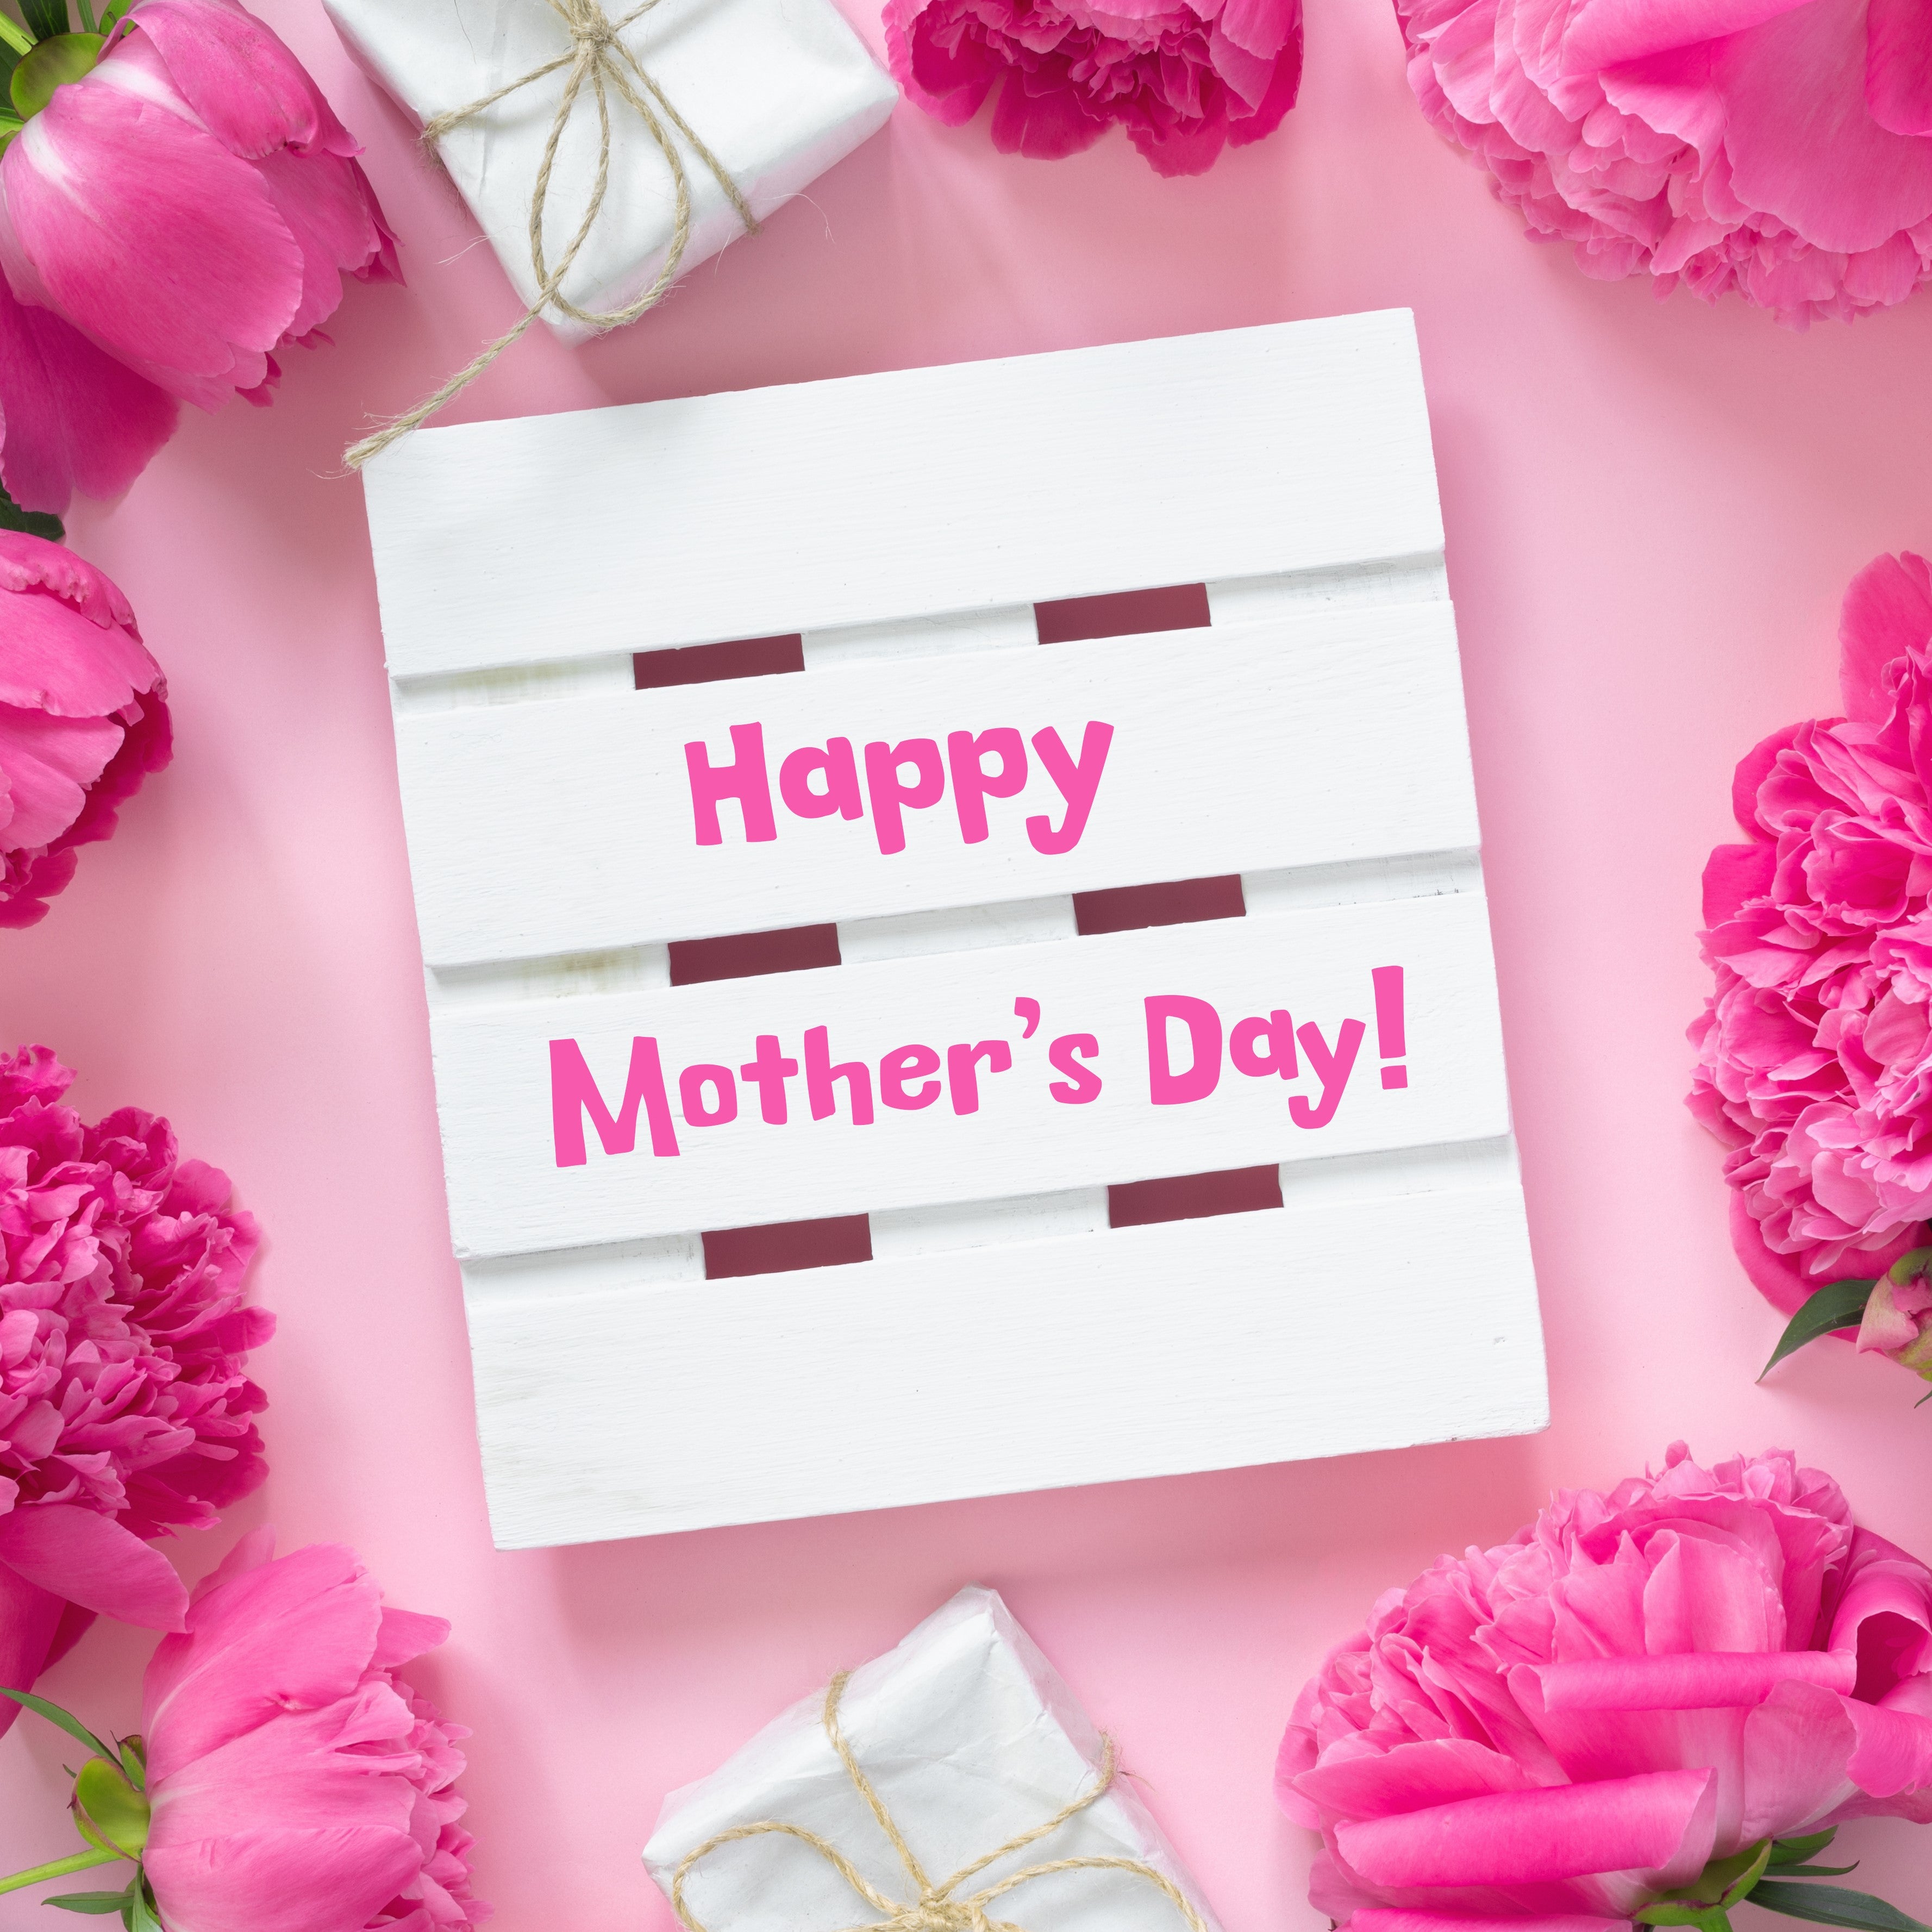 What Is The Official Flower For Mother S Day